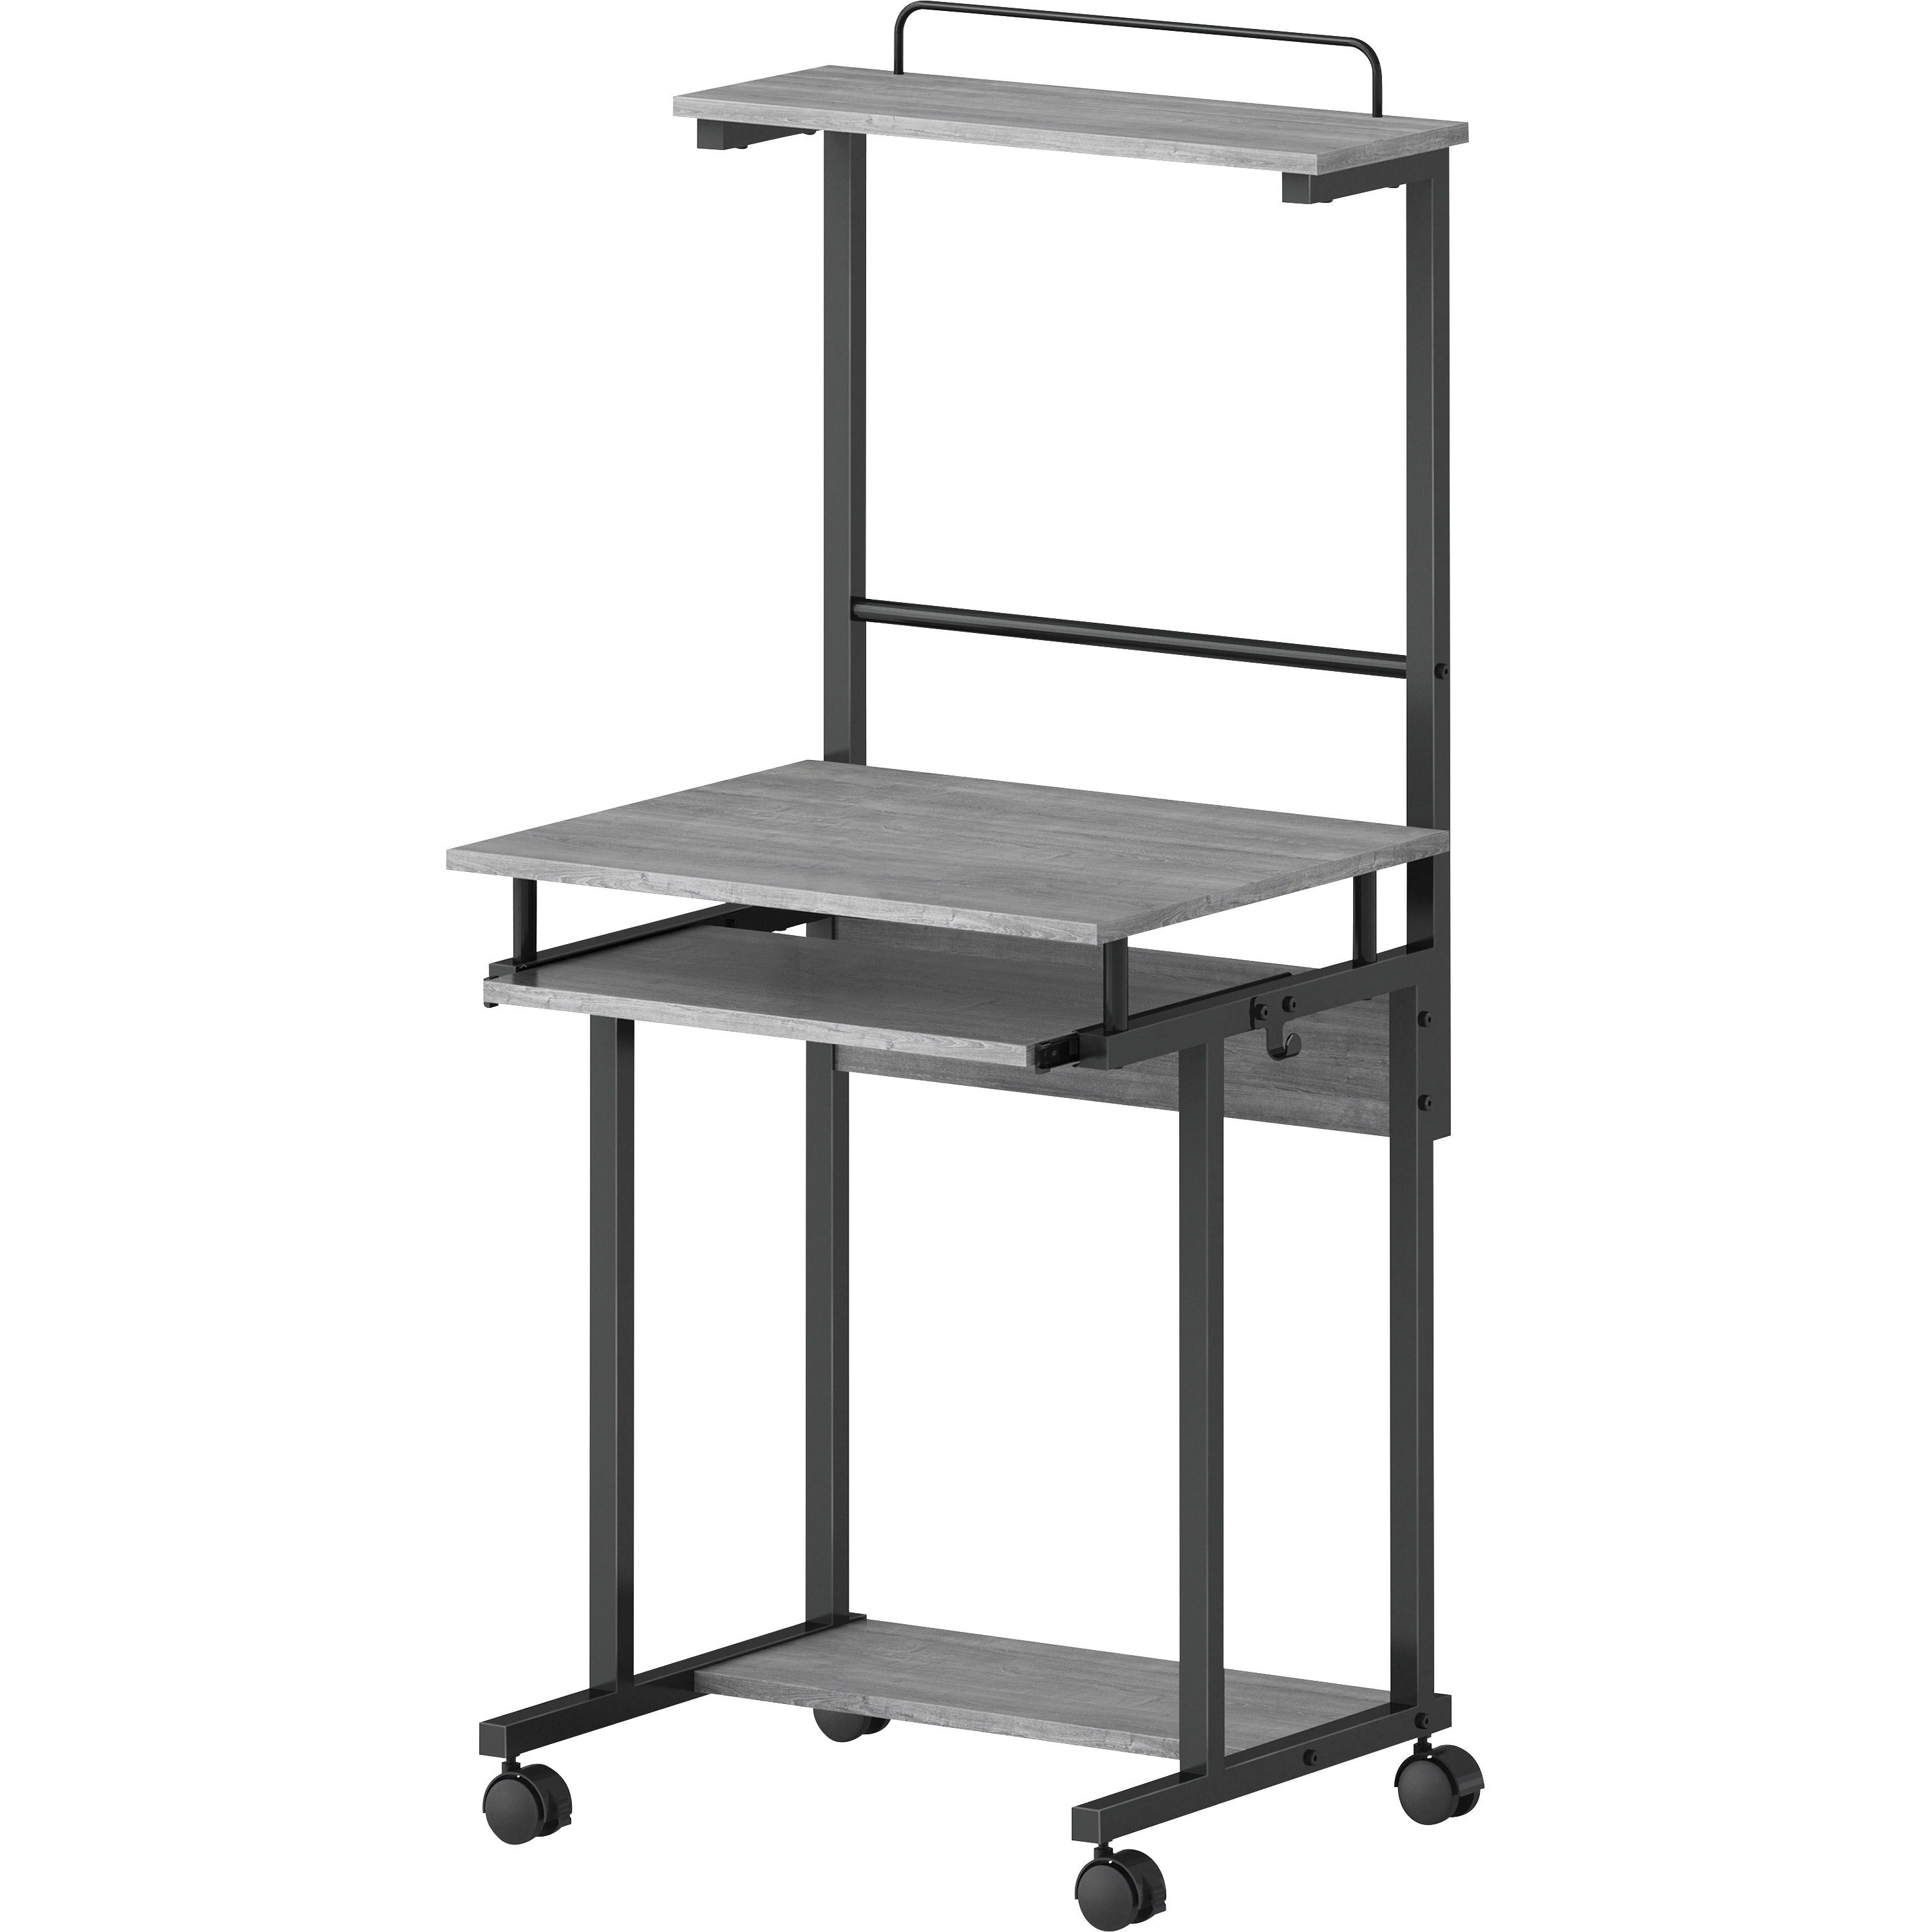 NuSparc Mobile Computer Workstation w/Keybrd Tray - For - Table TopWeathered Charcoal Laminate, Black Top - 110 lb Capacity x 23.60" Table Top Width x 20.60" Table Top Depth - 53.50" Height - Assembly Required - Medium Density Fiberboard (MDF) Top Ma - 4